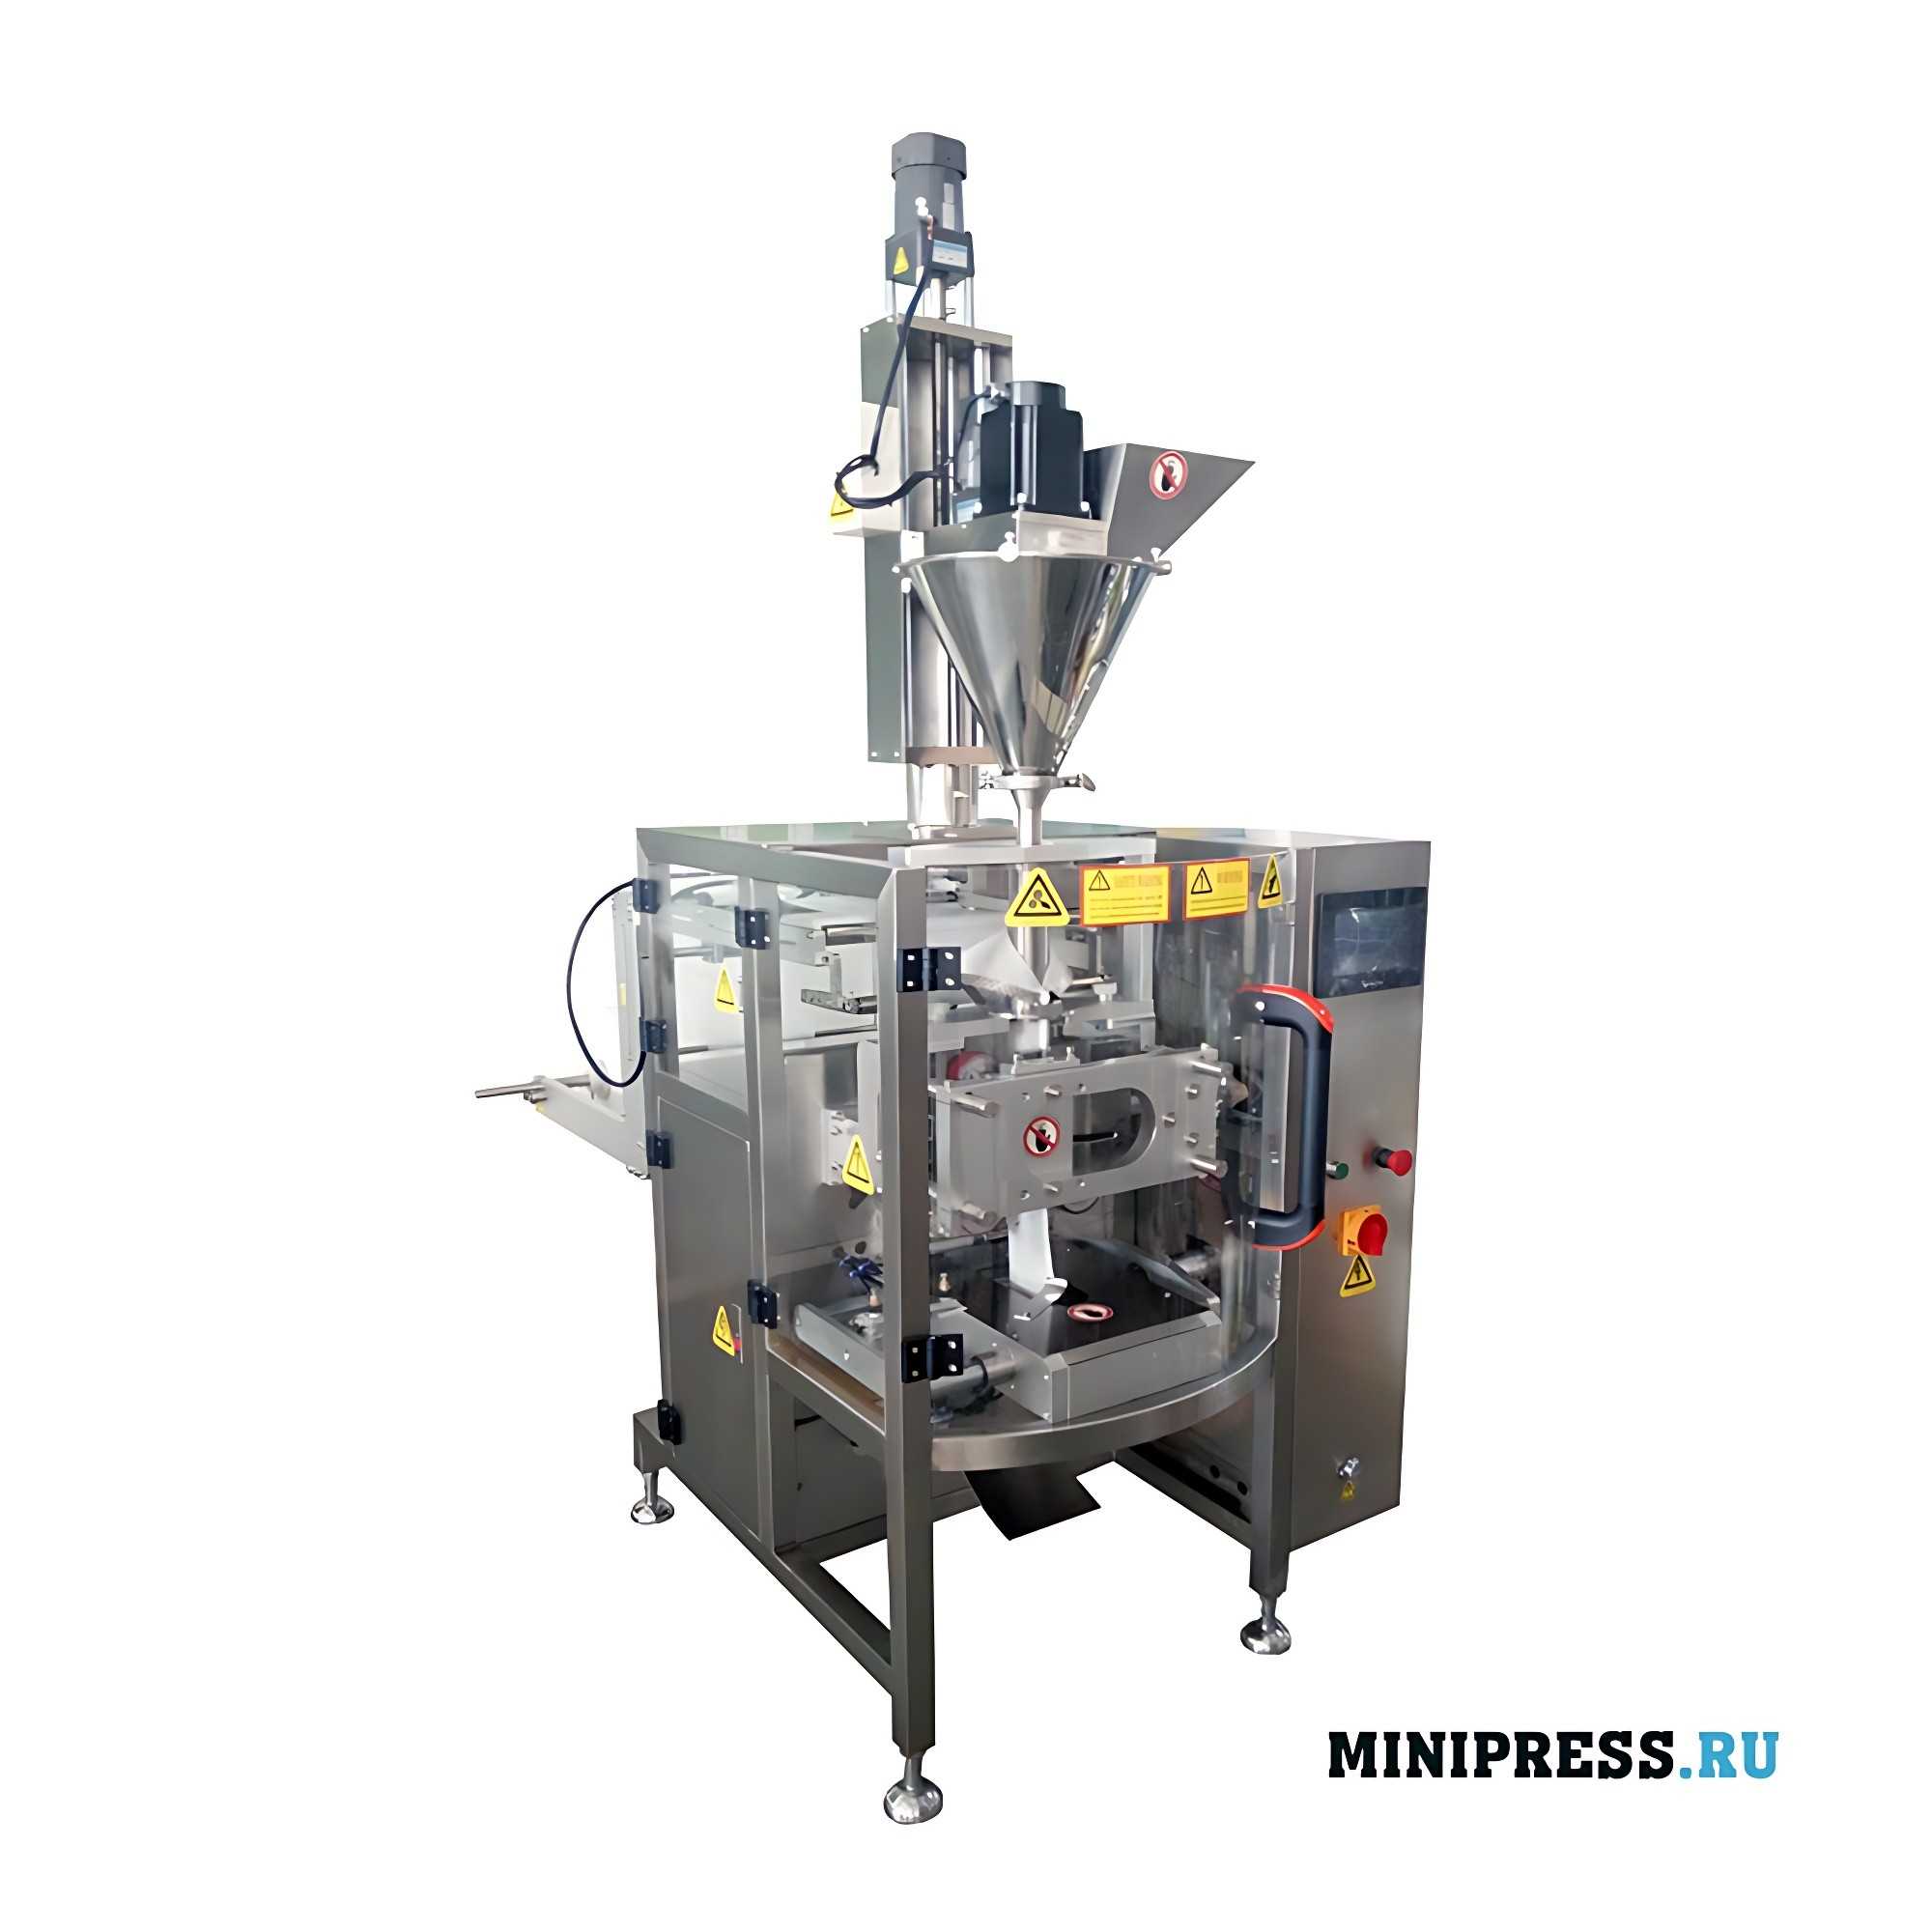 Automatic equipment for packing BD 30 powder